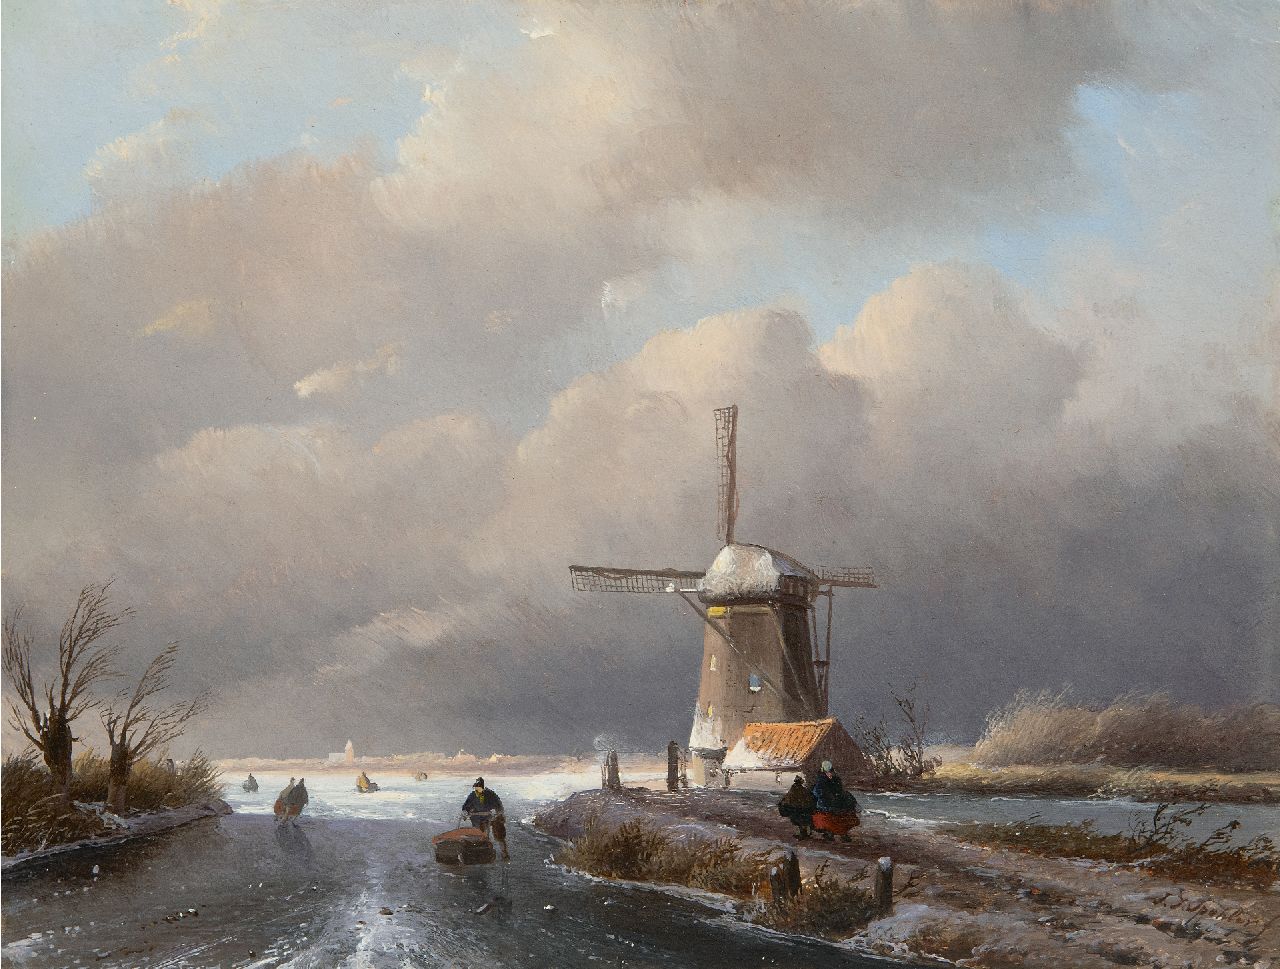 Spohler J.J.  | Jan Jacob Spohler | Paintings offered for sale | Ice scene with skaters near a windmill on a cloudy day, oil on panel 24.1 x 31.7 cm, signed l.r.